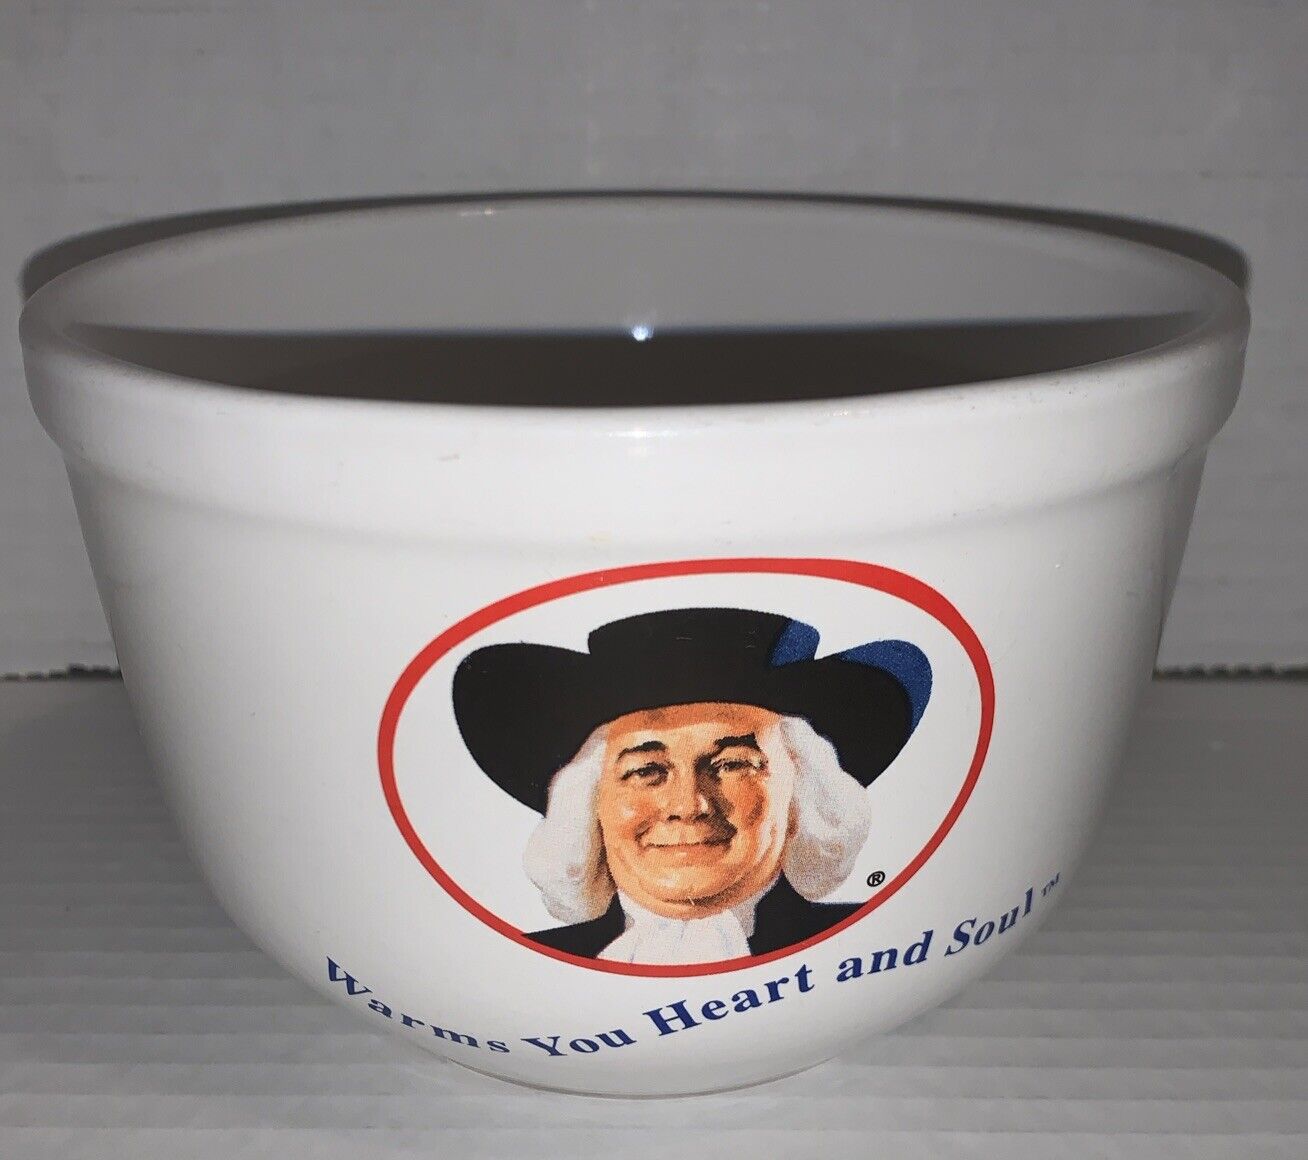 1999 Quaker Oats ceramic cereal bowl Warms You Heart And Soul Houston Harvest